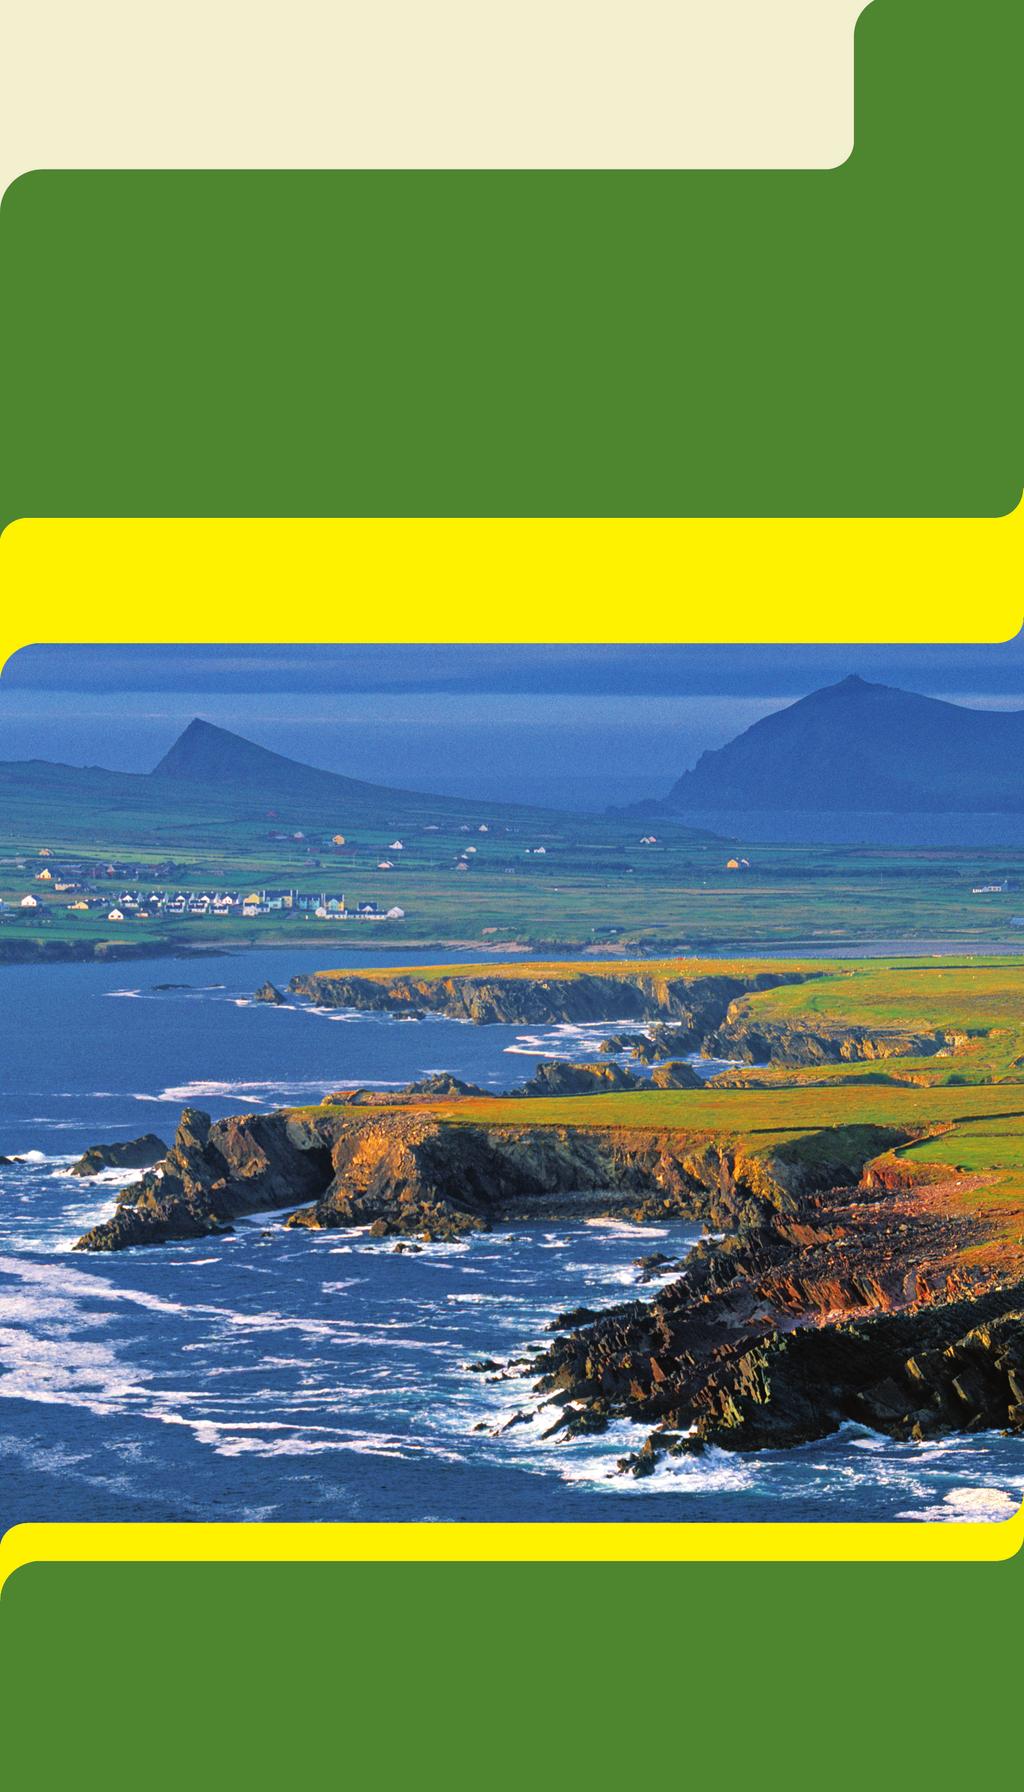 Bryn Mawr Alumnae Association presents ENCHANTING IRELAND A Tour of the Emerald Isle June 5-17, 2016 13 days from $4,158 total price from Boston, New York ($3,795 air & land inclusive plus $363